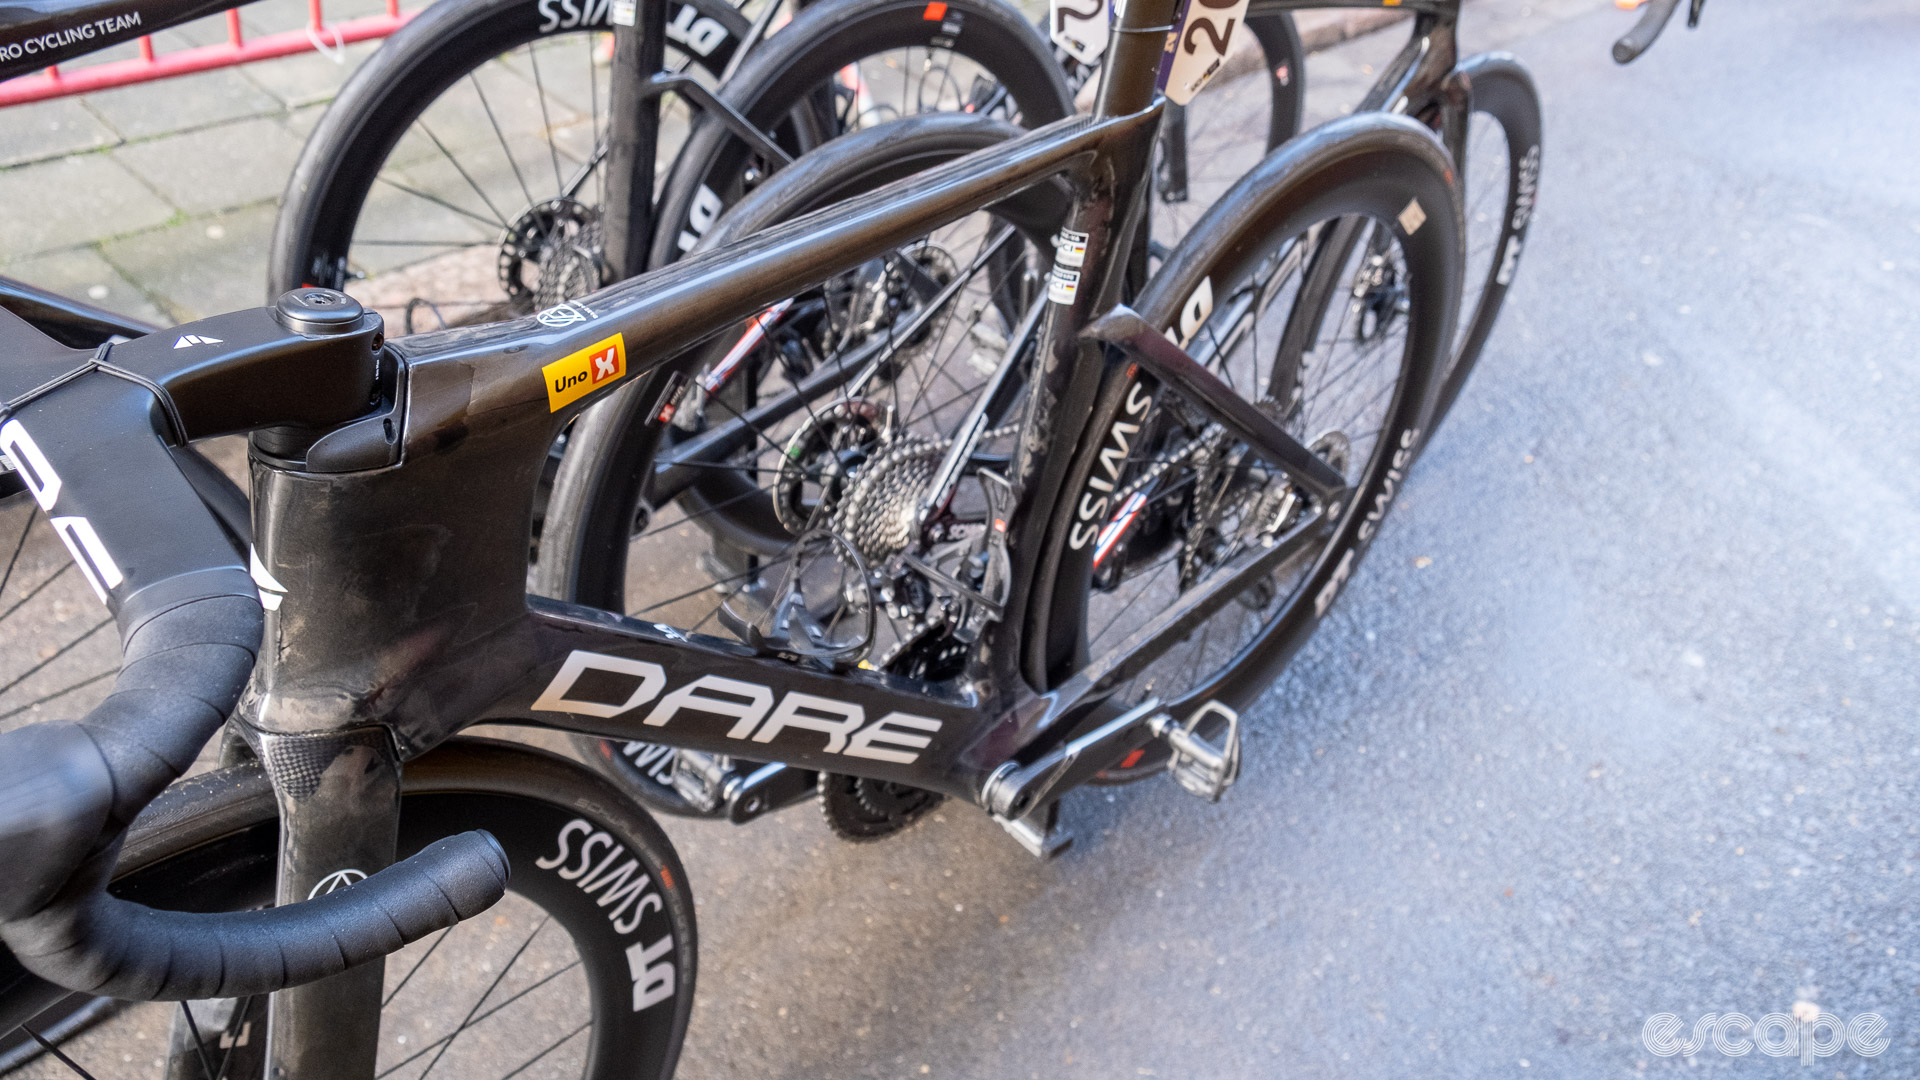 The image shows Kristoff's new Dare aero bike from side on.